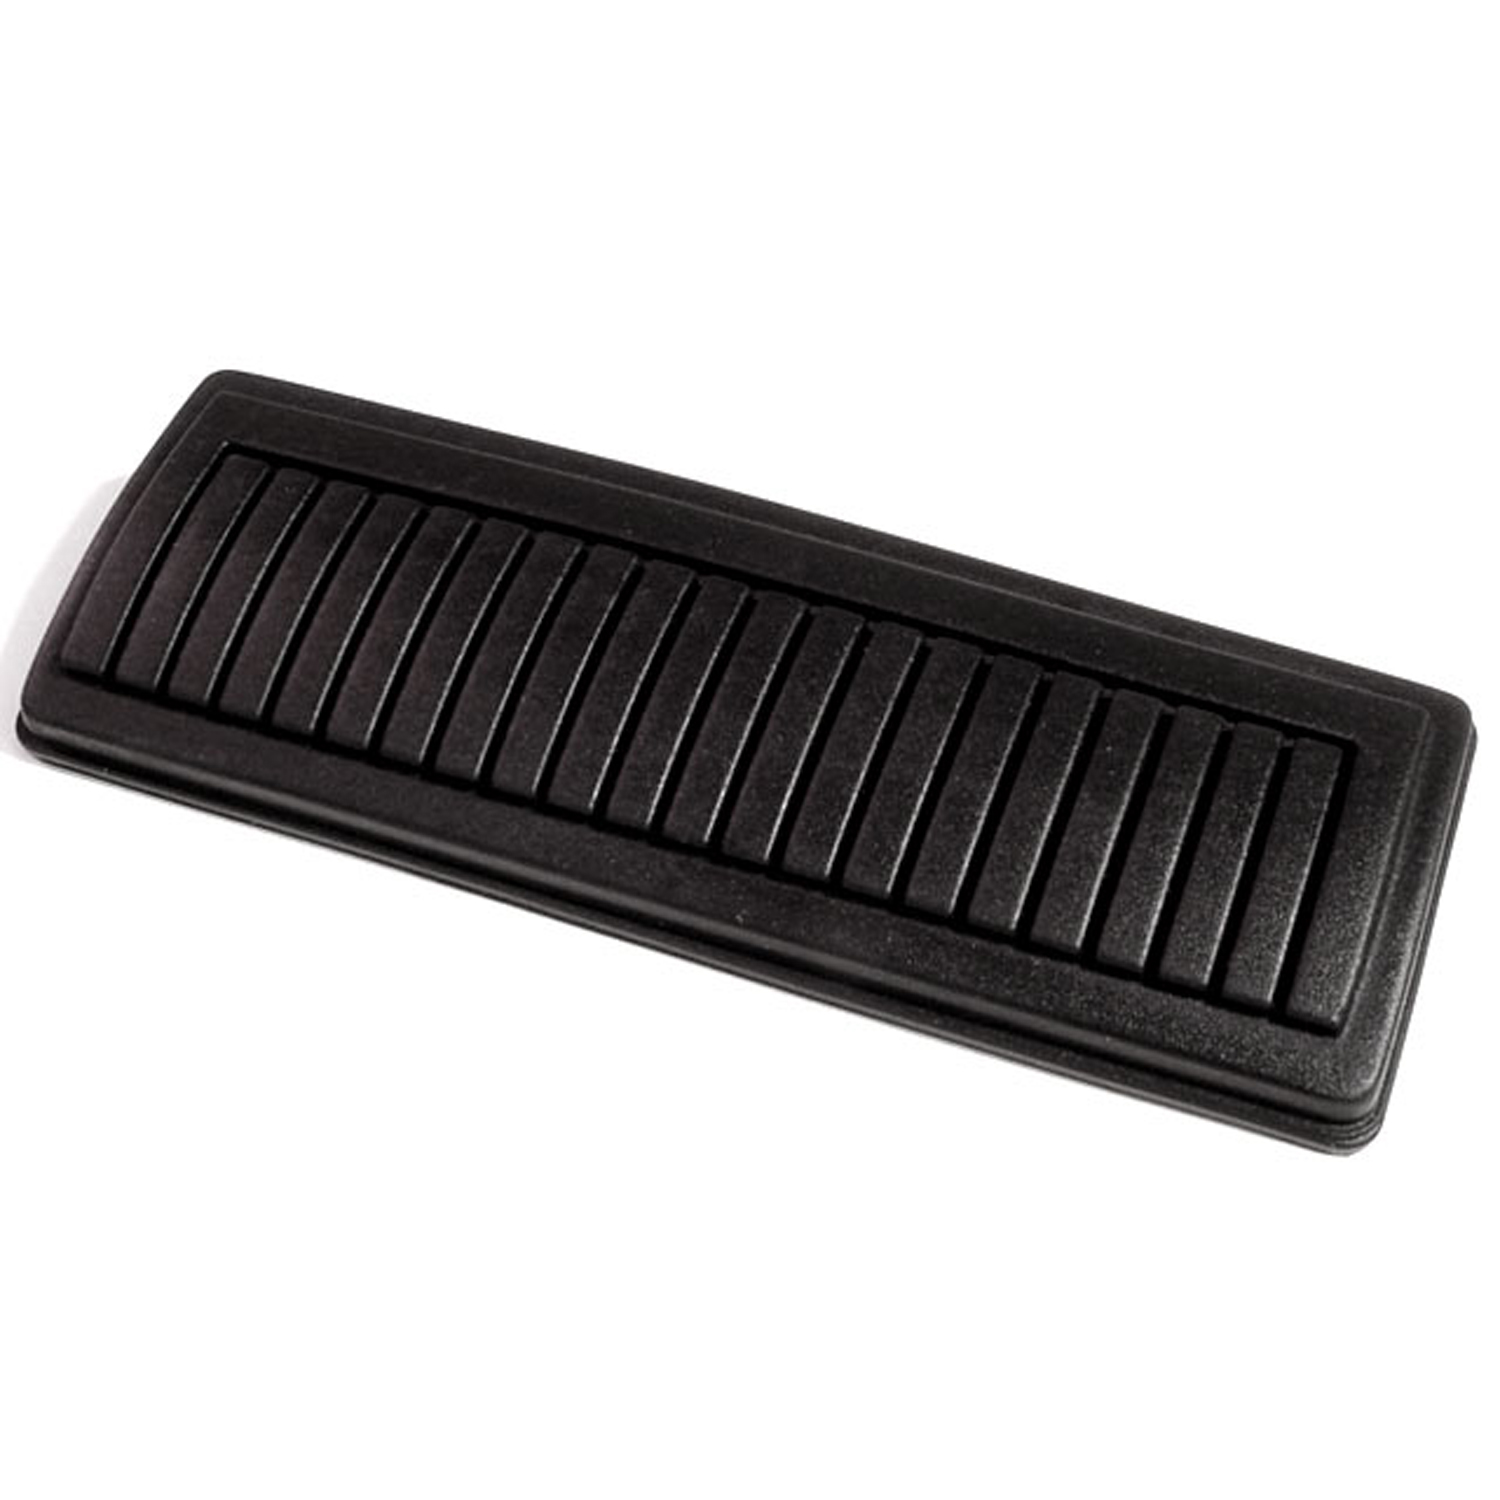 1965 Dodge Dart Brake Pedal Pad, for models with automatic transmission-CB 200